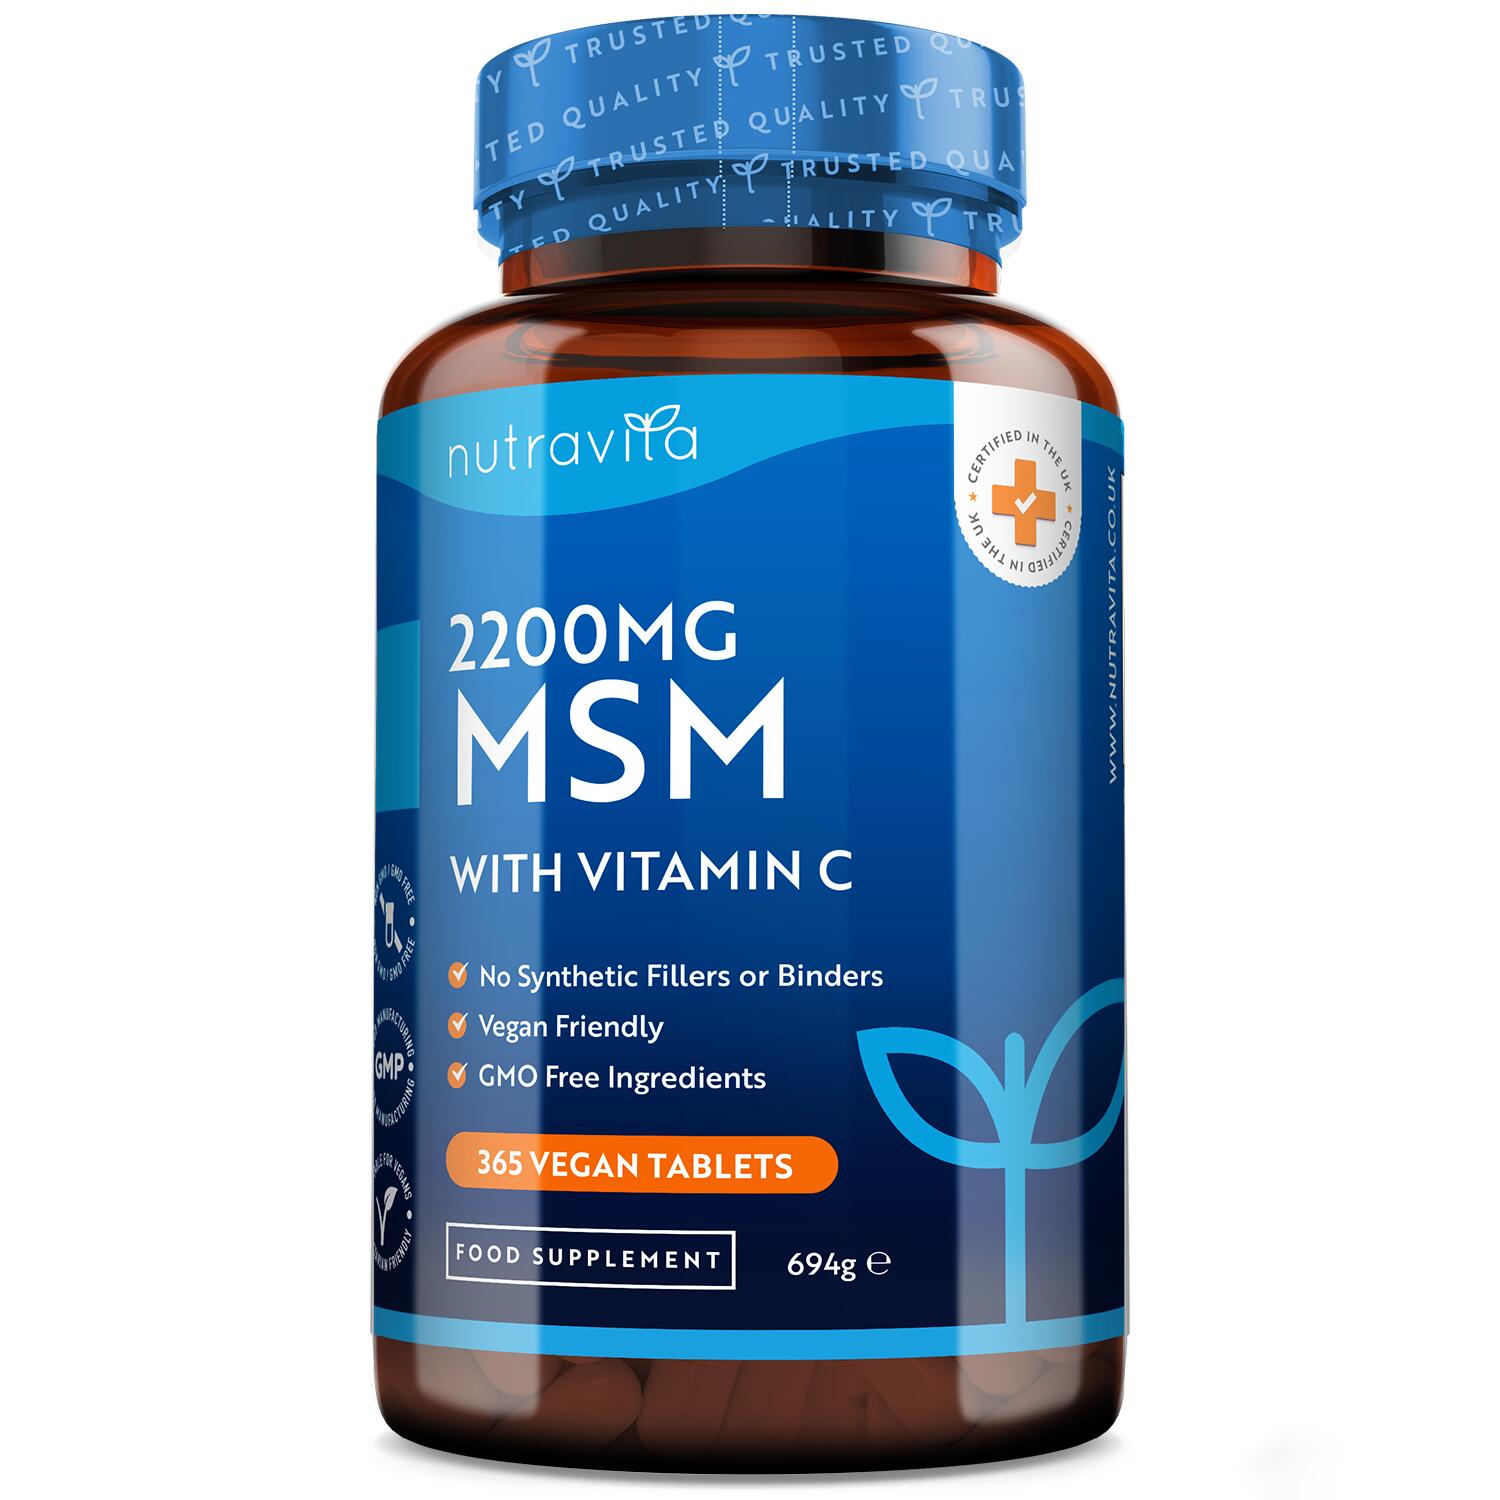 NUTRAVITA MSM with Vitamin C contributes to collagen formation for the function of bones.